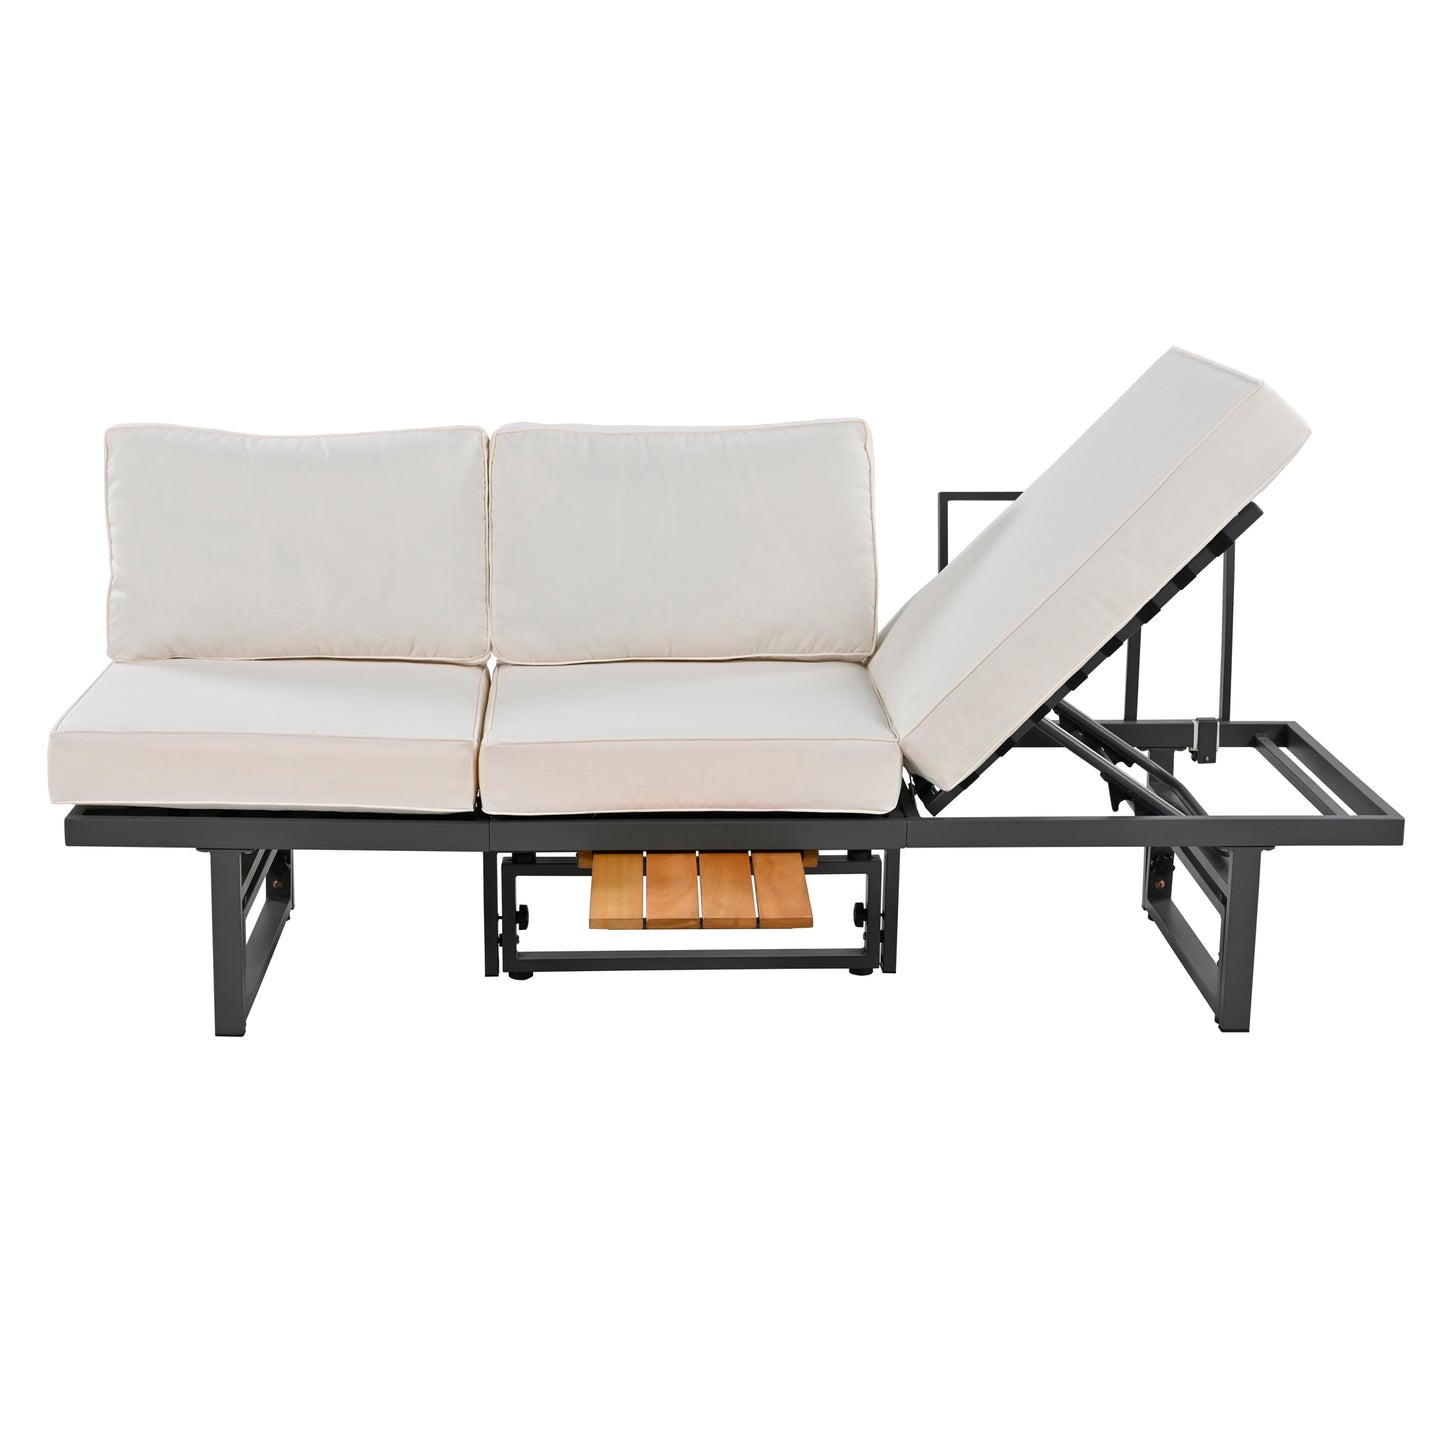 3-Piece Modern Multi-Functional Outdoor Sectional Sofa Set